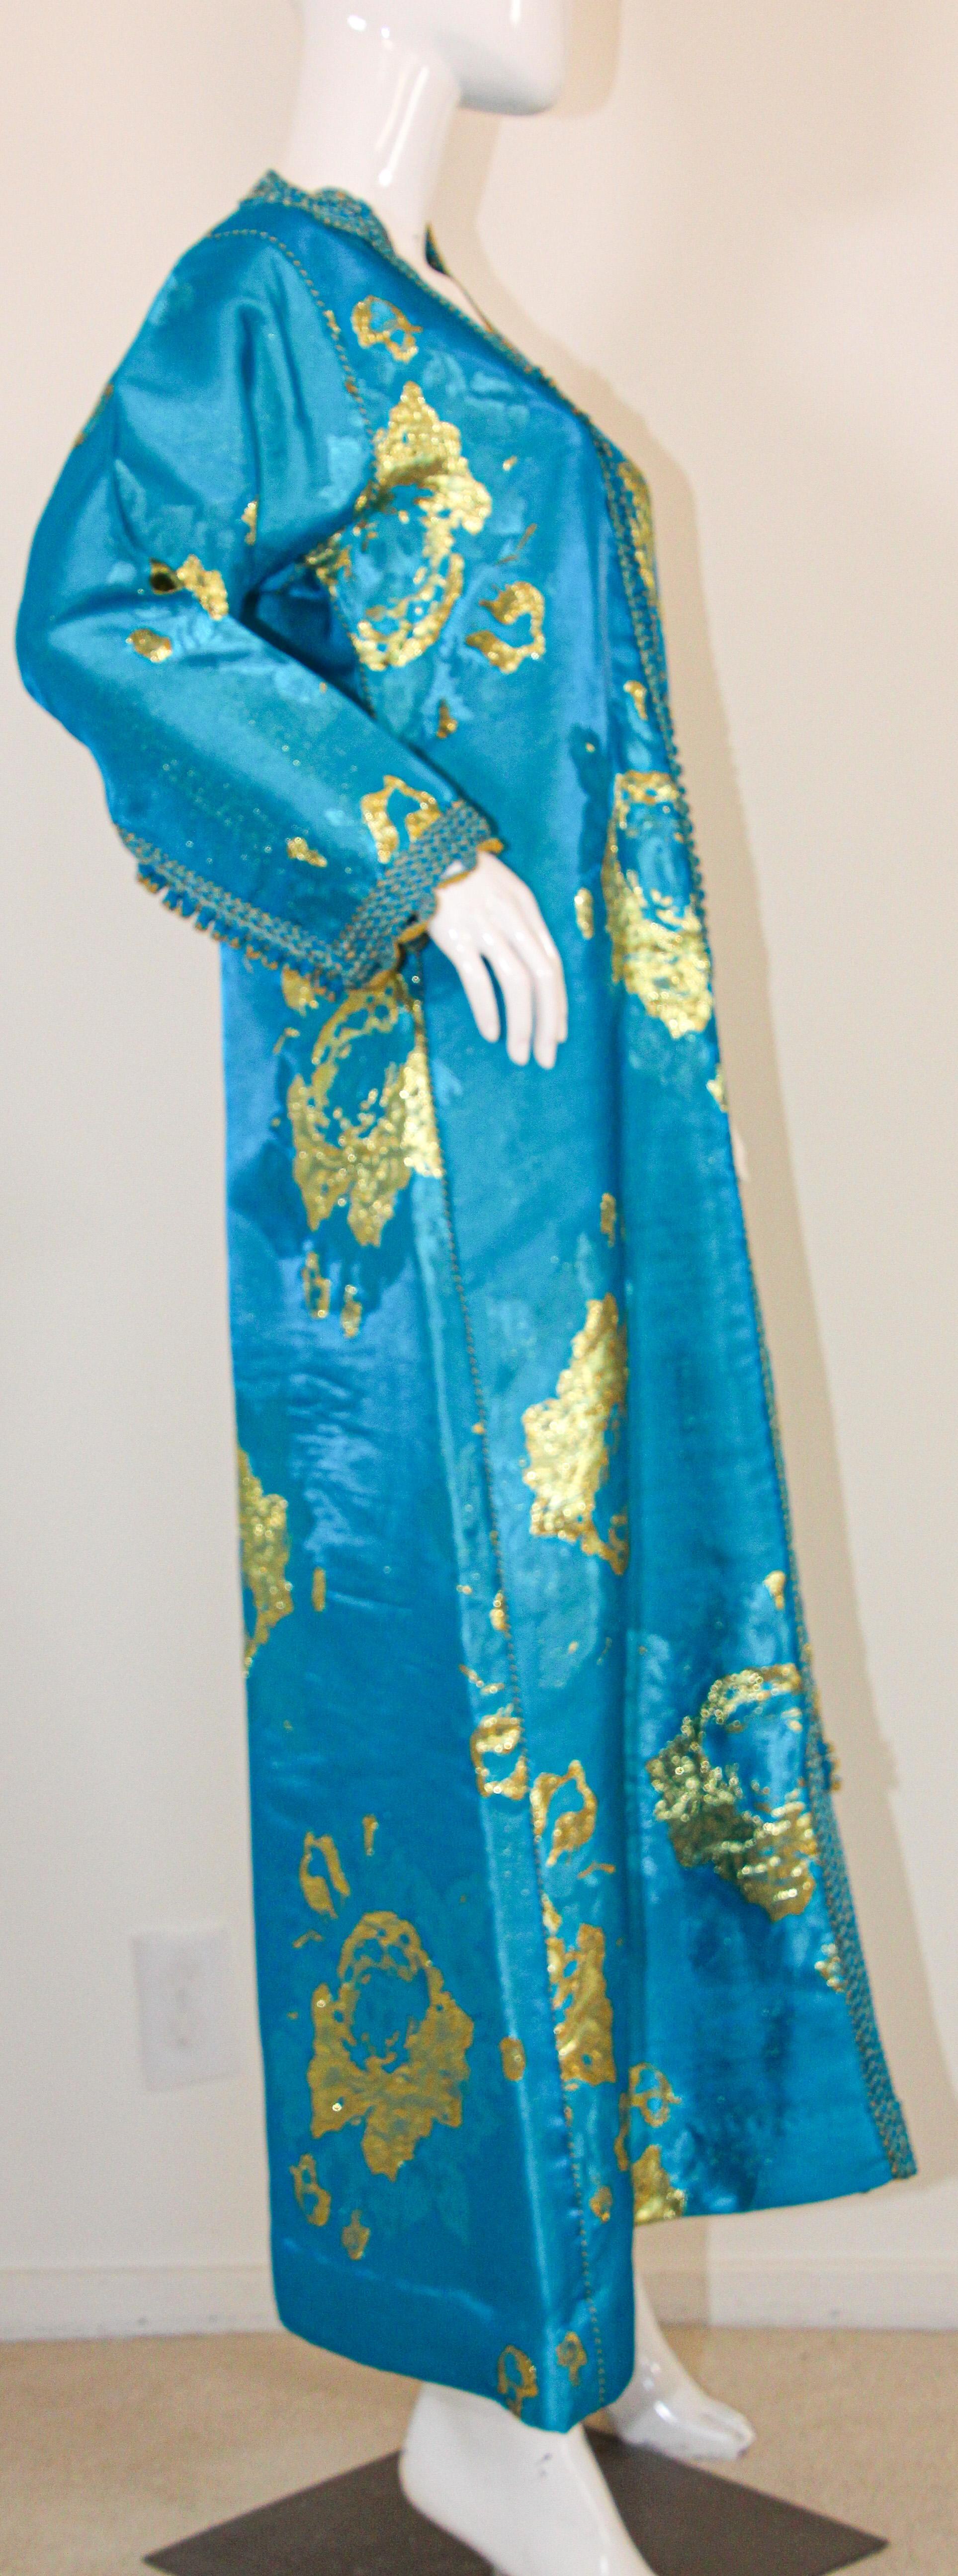 Moroccan Vintage Kaftan in Turquoise and Gold Floral Brocade Metallic Lame 8